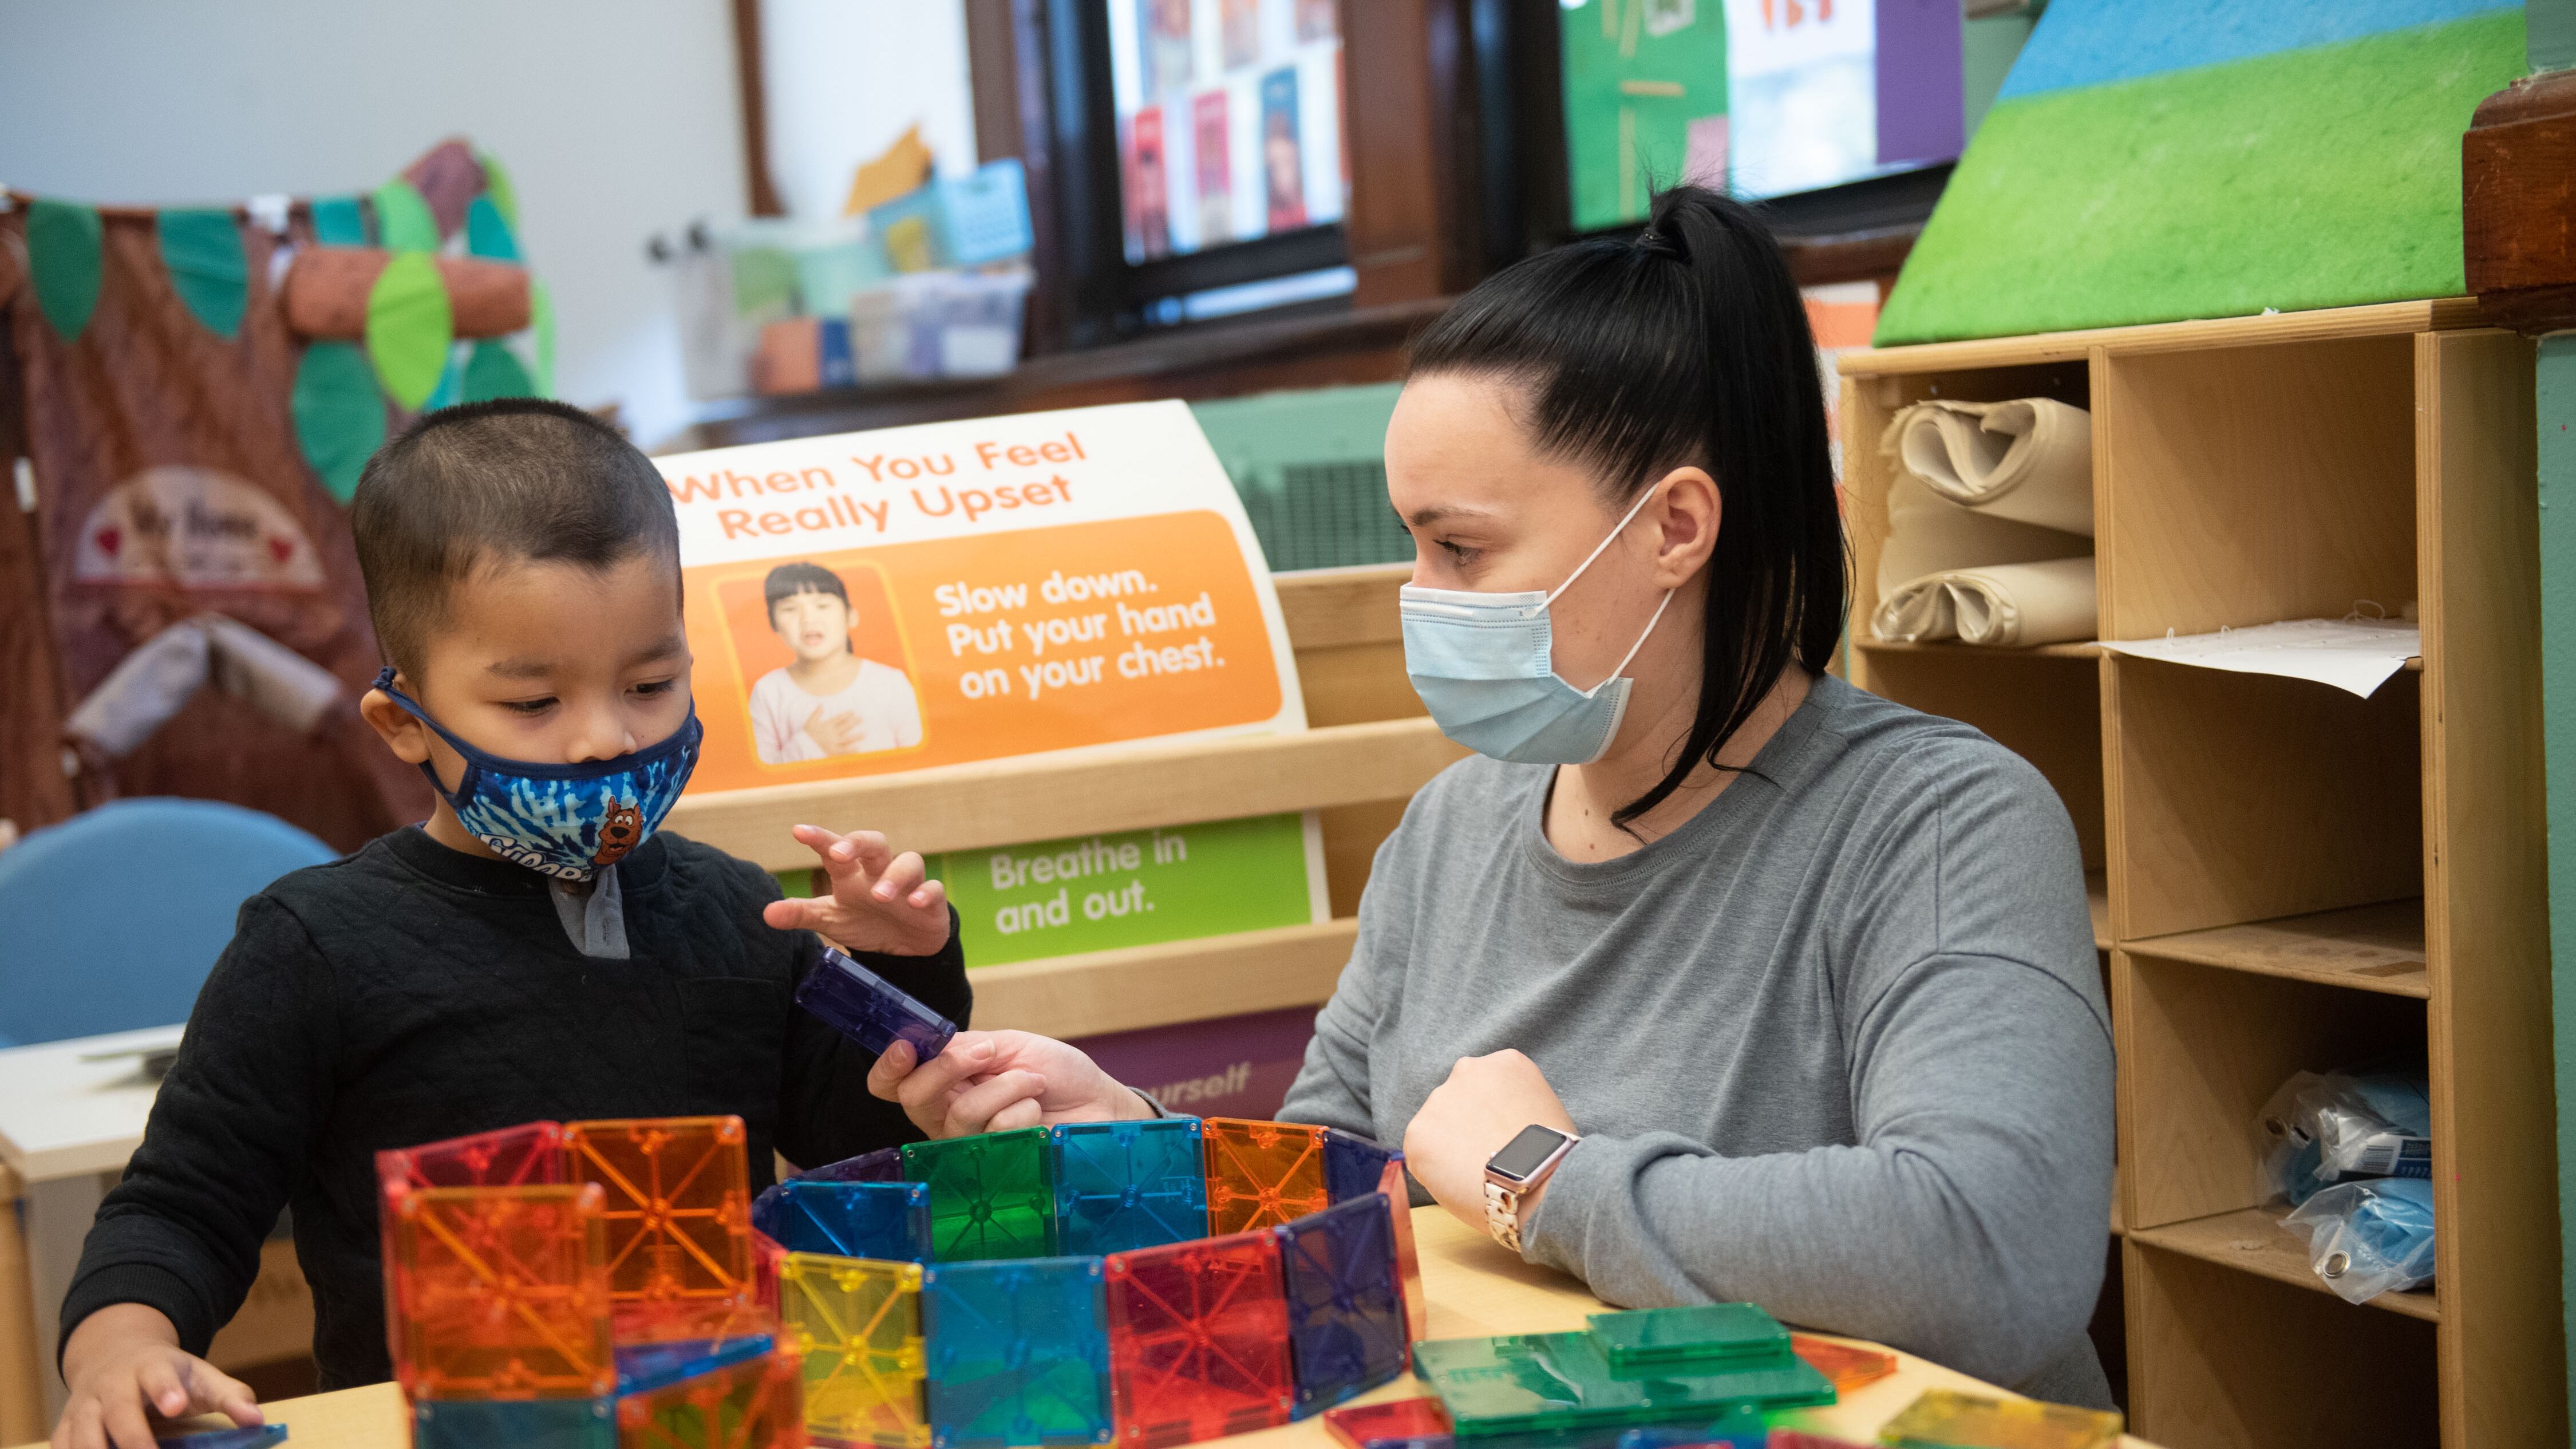 A preschool staff member works with a young boy with blocks in the classroom. They are both wearing protective masks.